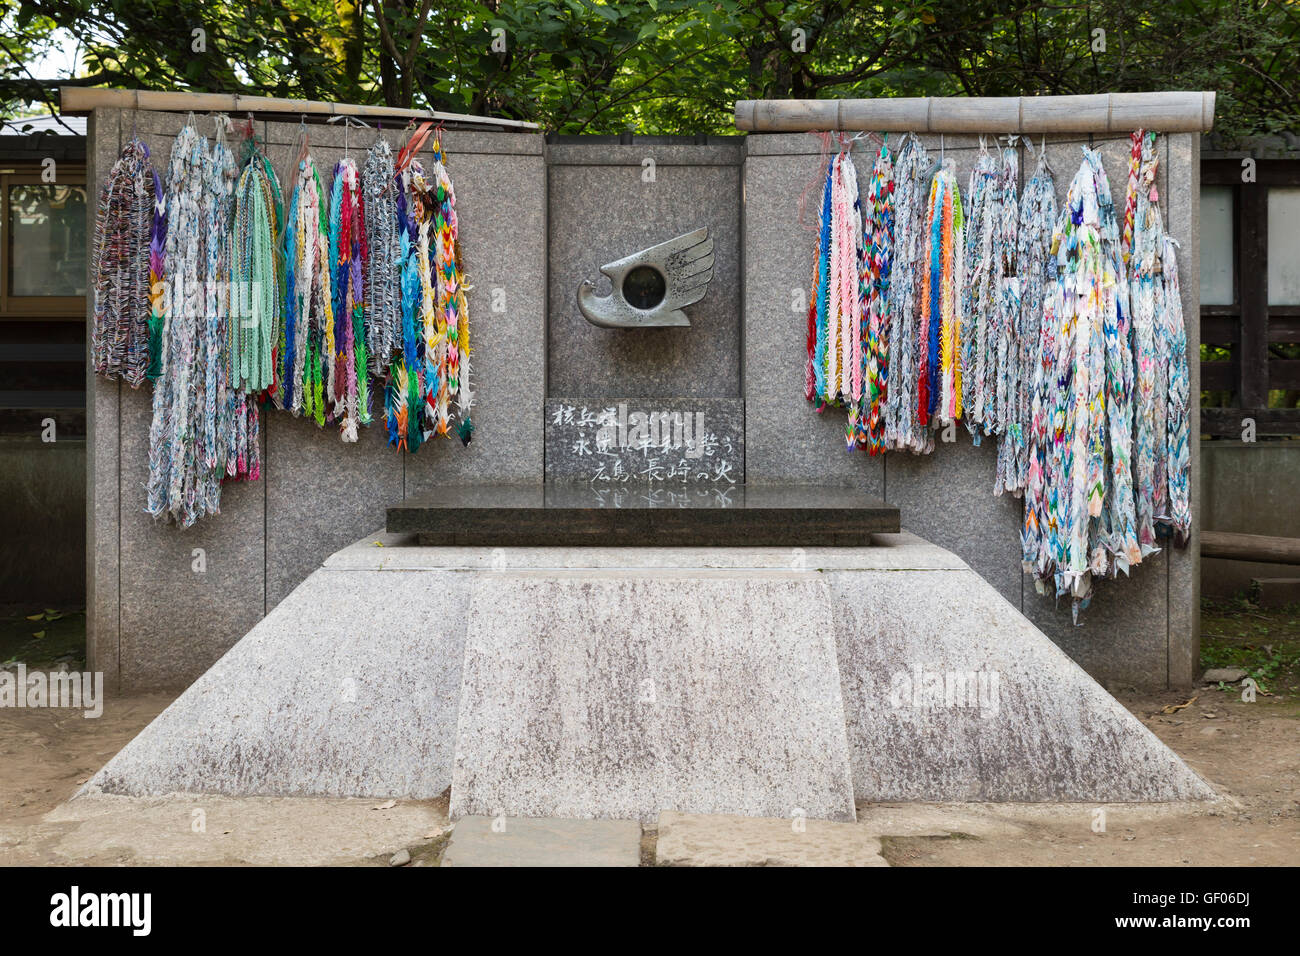 The Hiroshima memorial at the Toshogu shrine in the Ueno park in Tokyo, Japan. Stock Photo